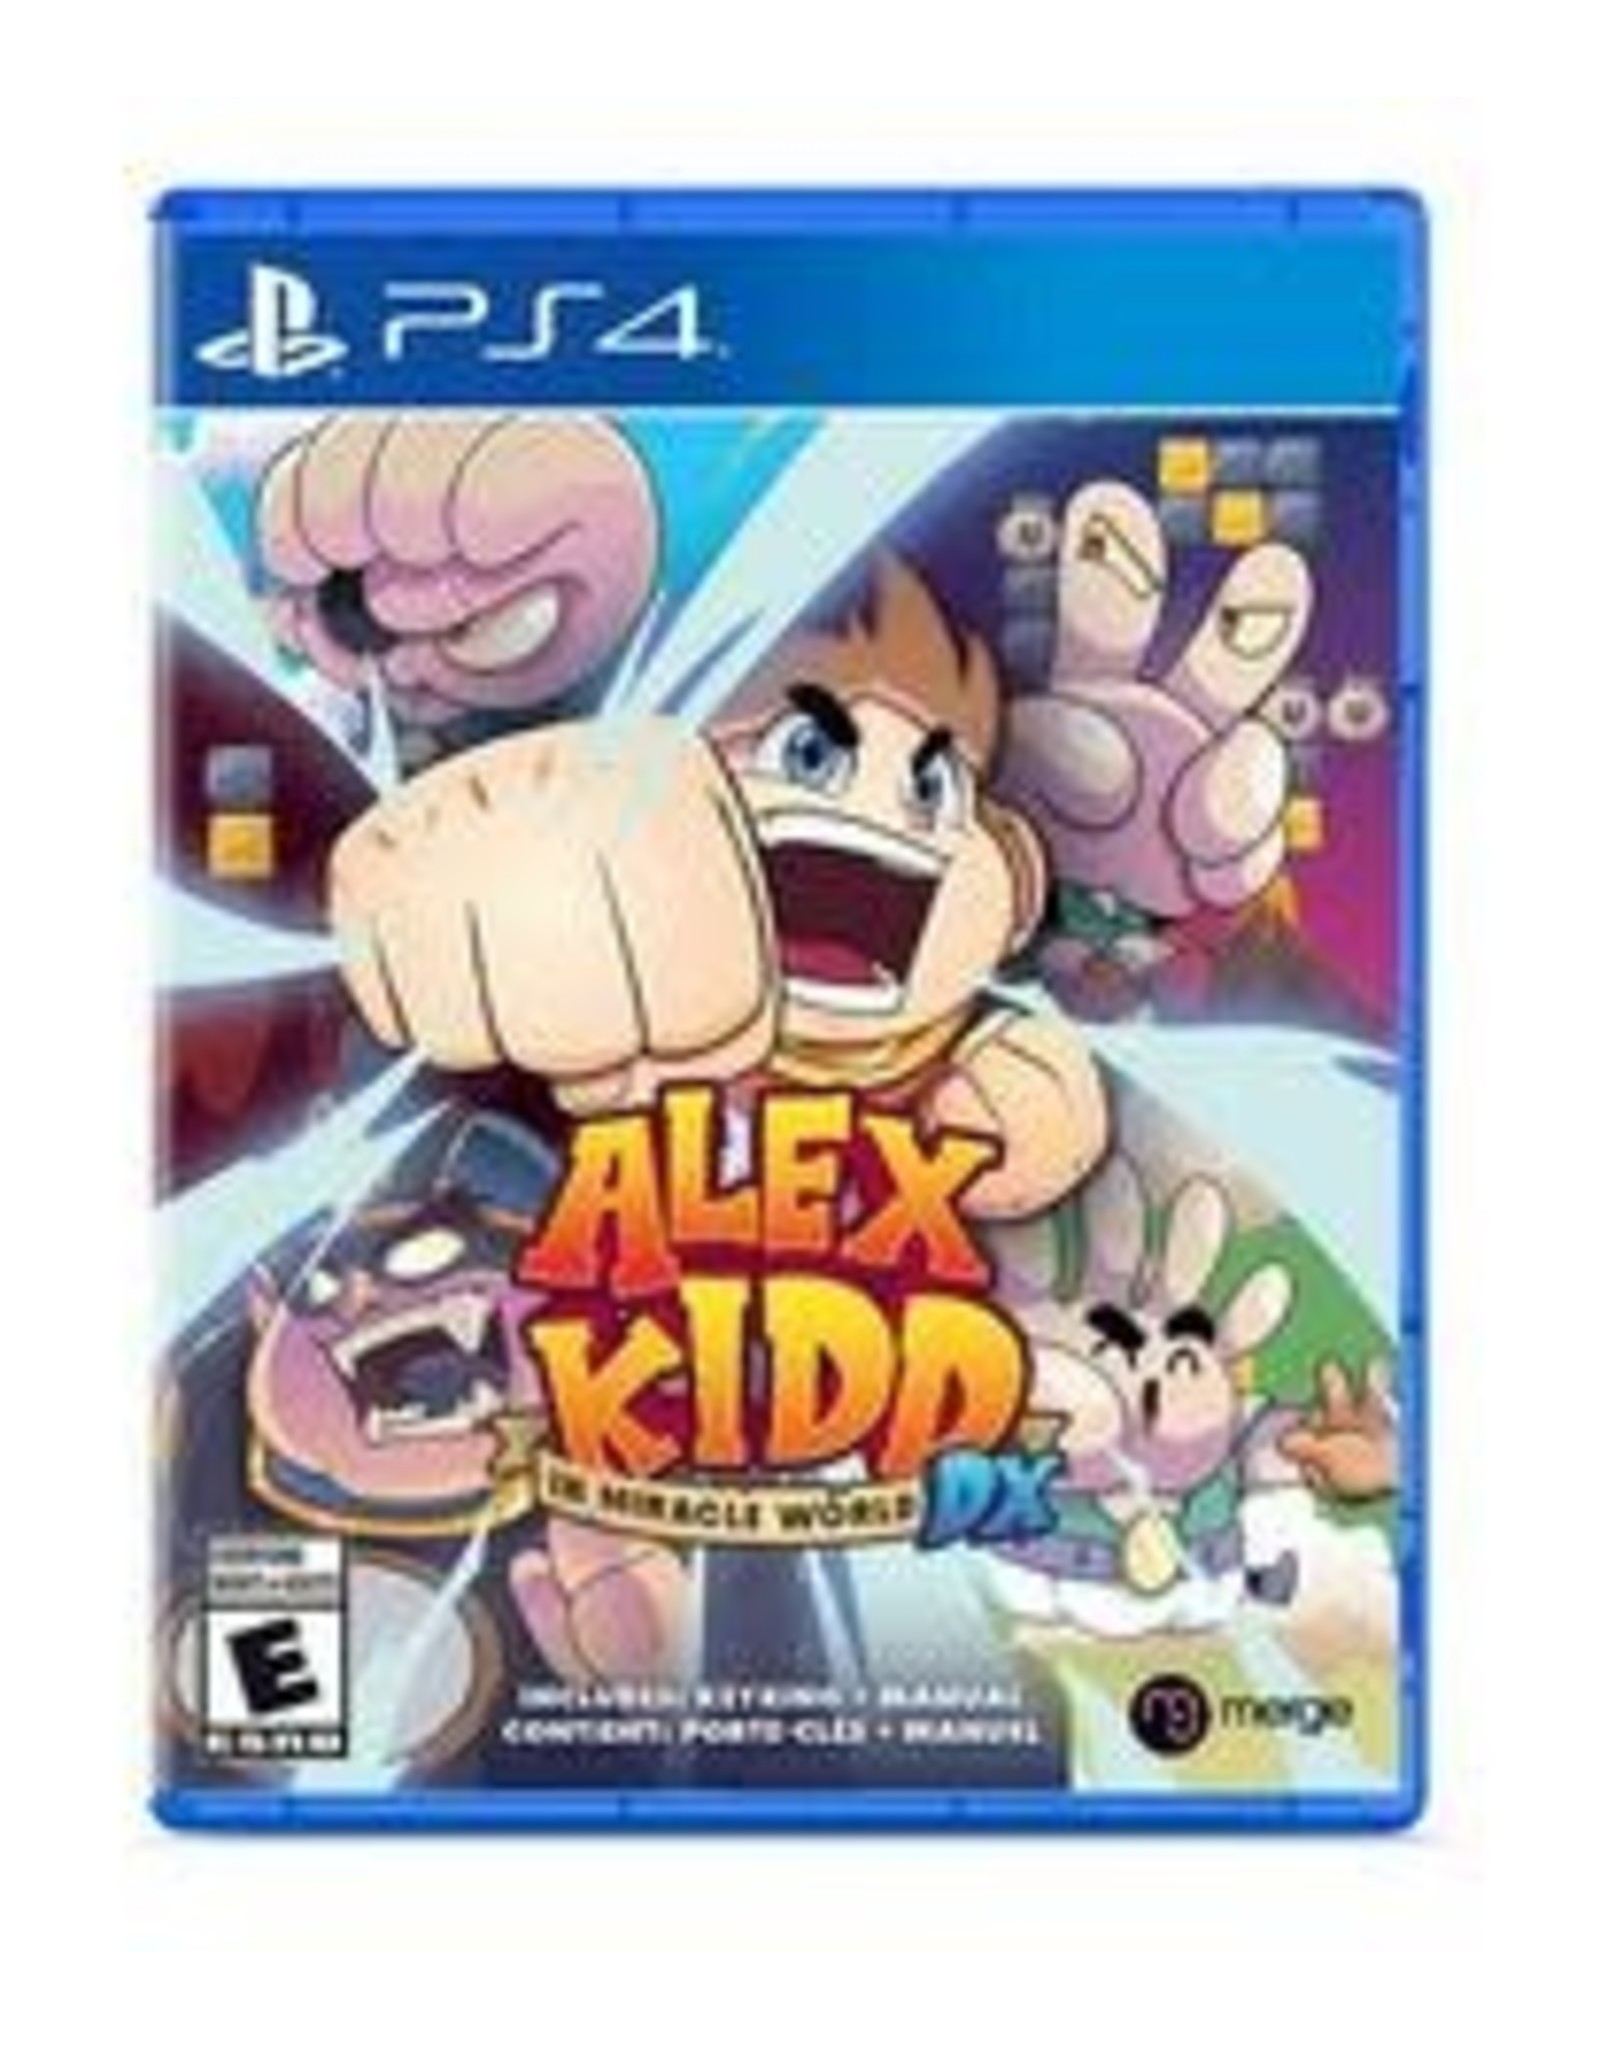 Playstation 4 Alex Kidd in Miracle World DX (CiB, Includes Keyring and Manual)